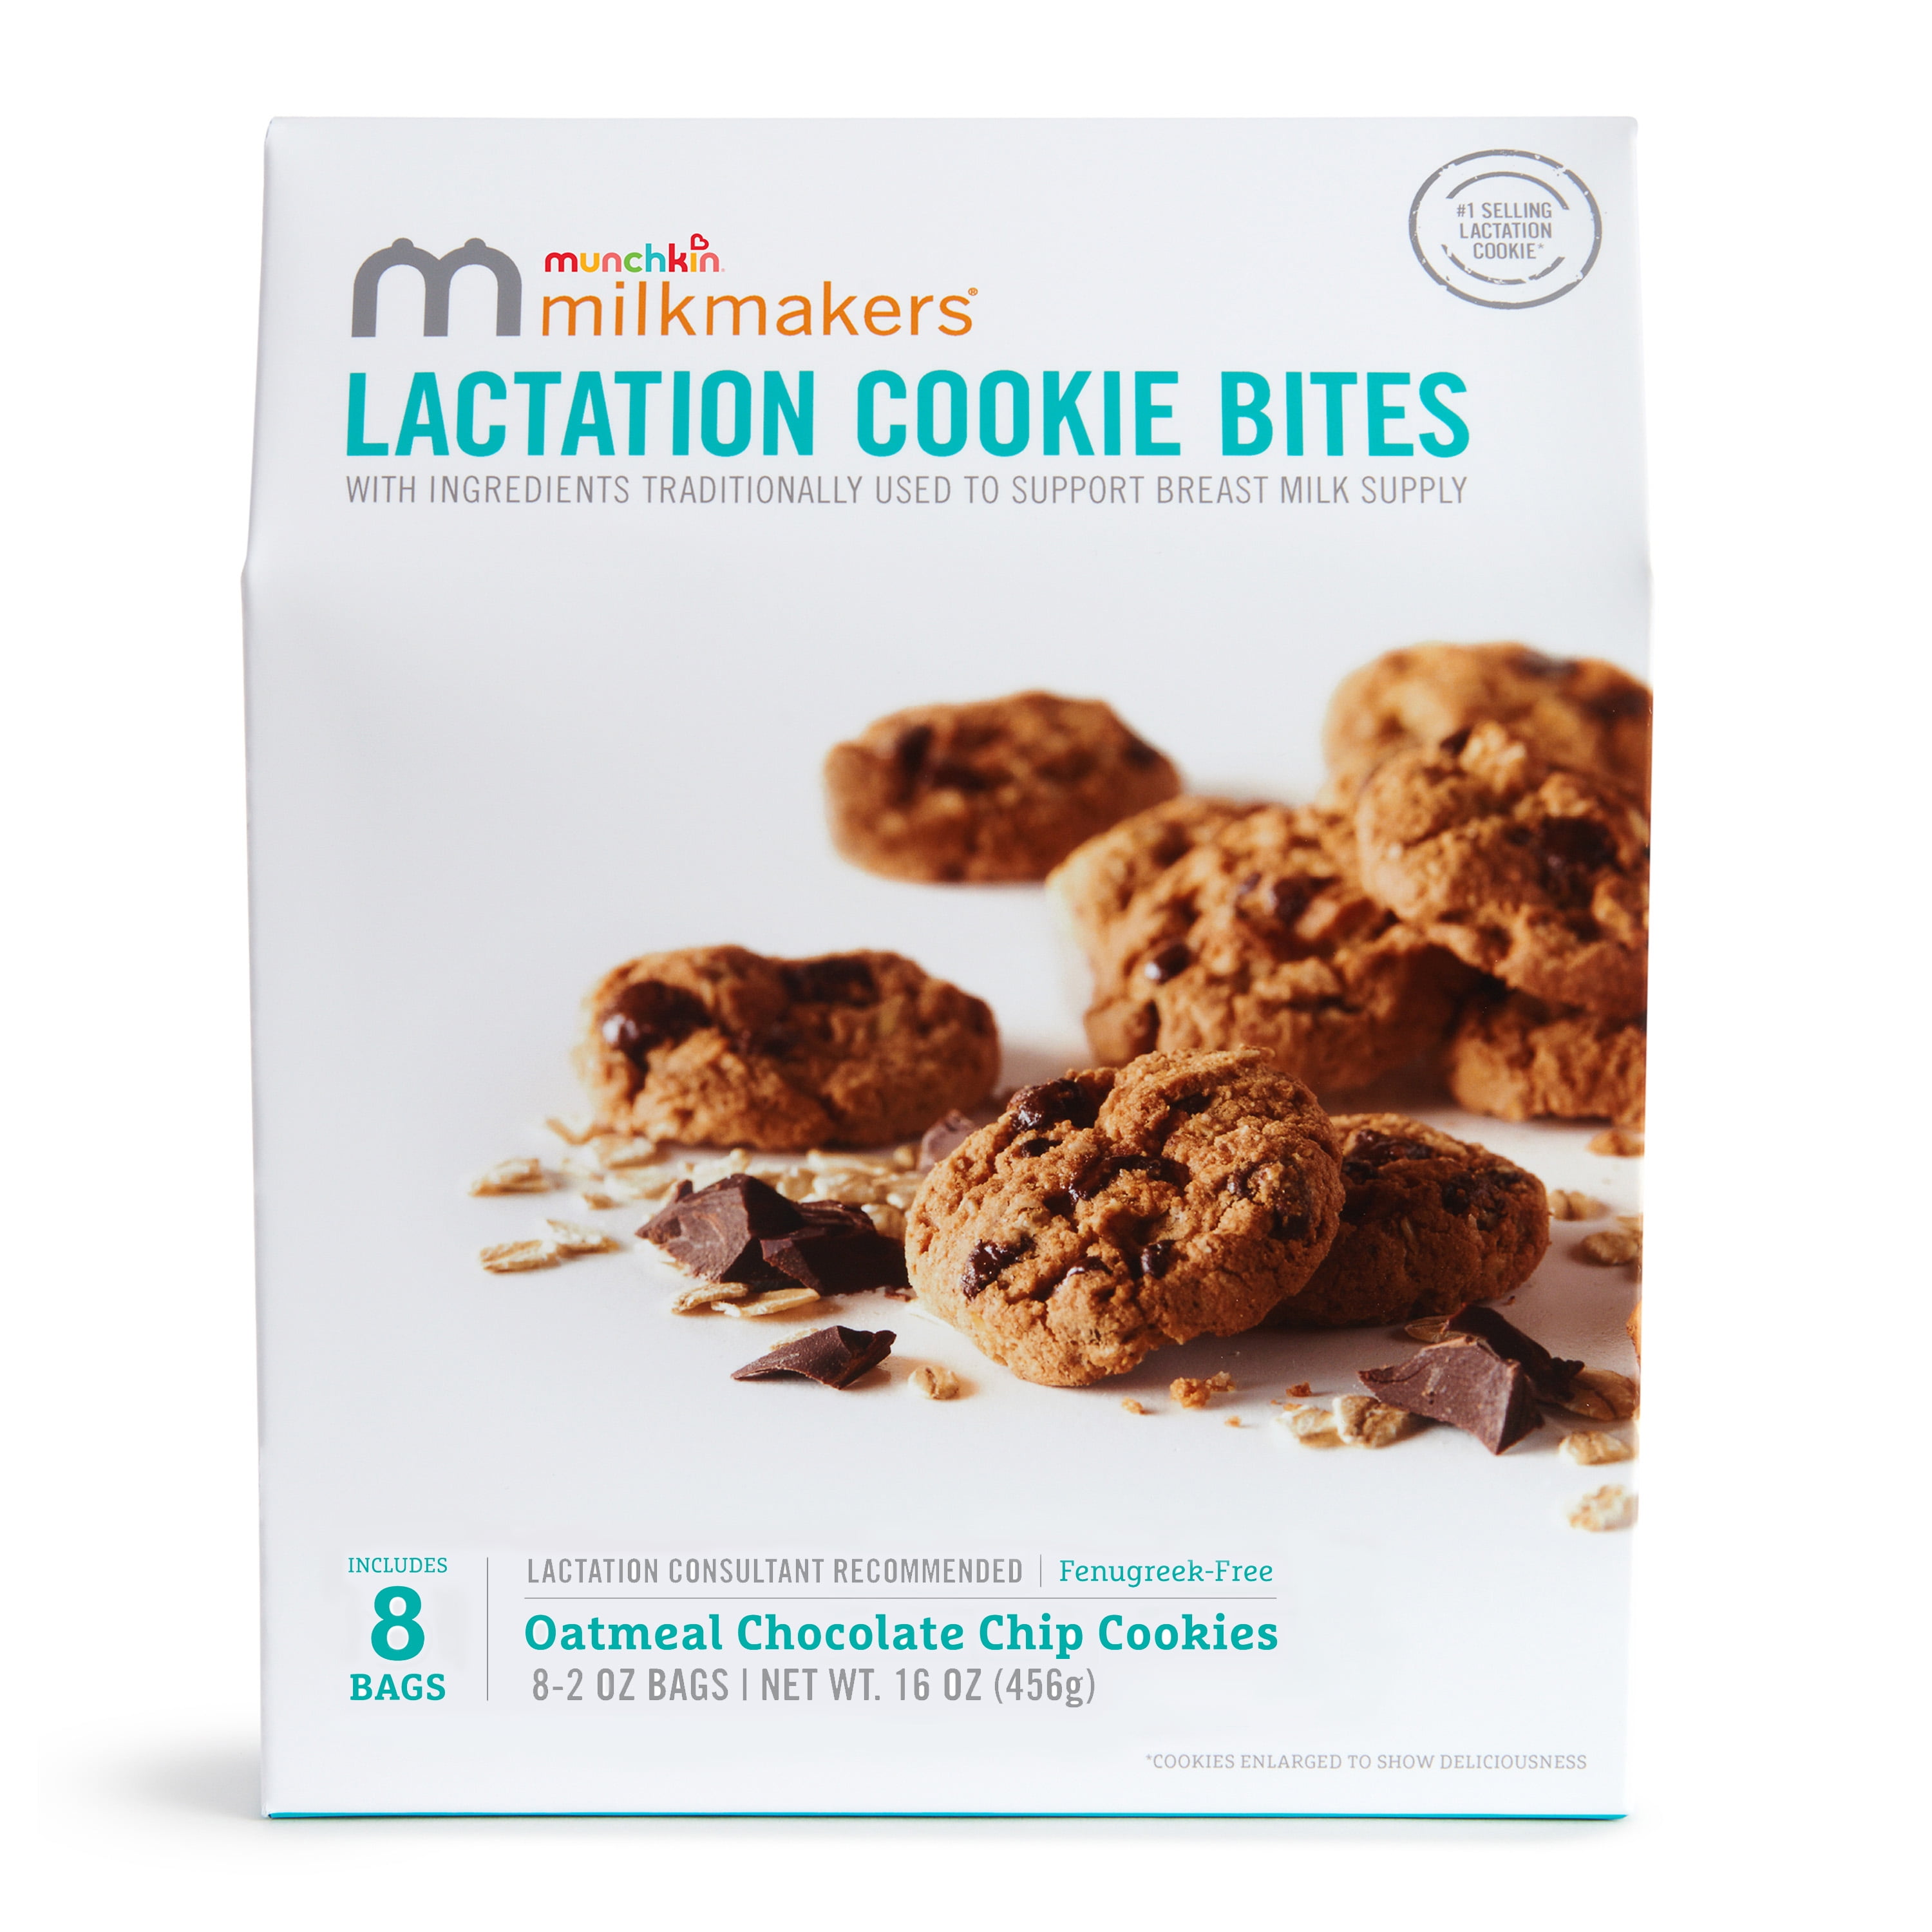 Munchkin Milkmakers Lactation Cookie Bites, Oatmeal Chocolate Chip, 8 Count